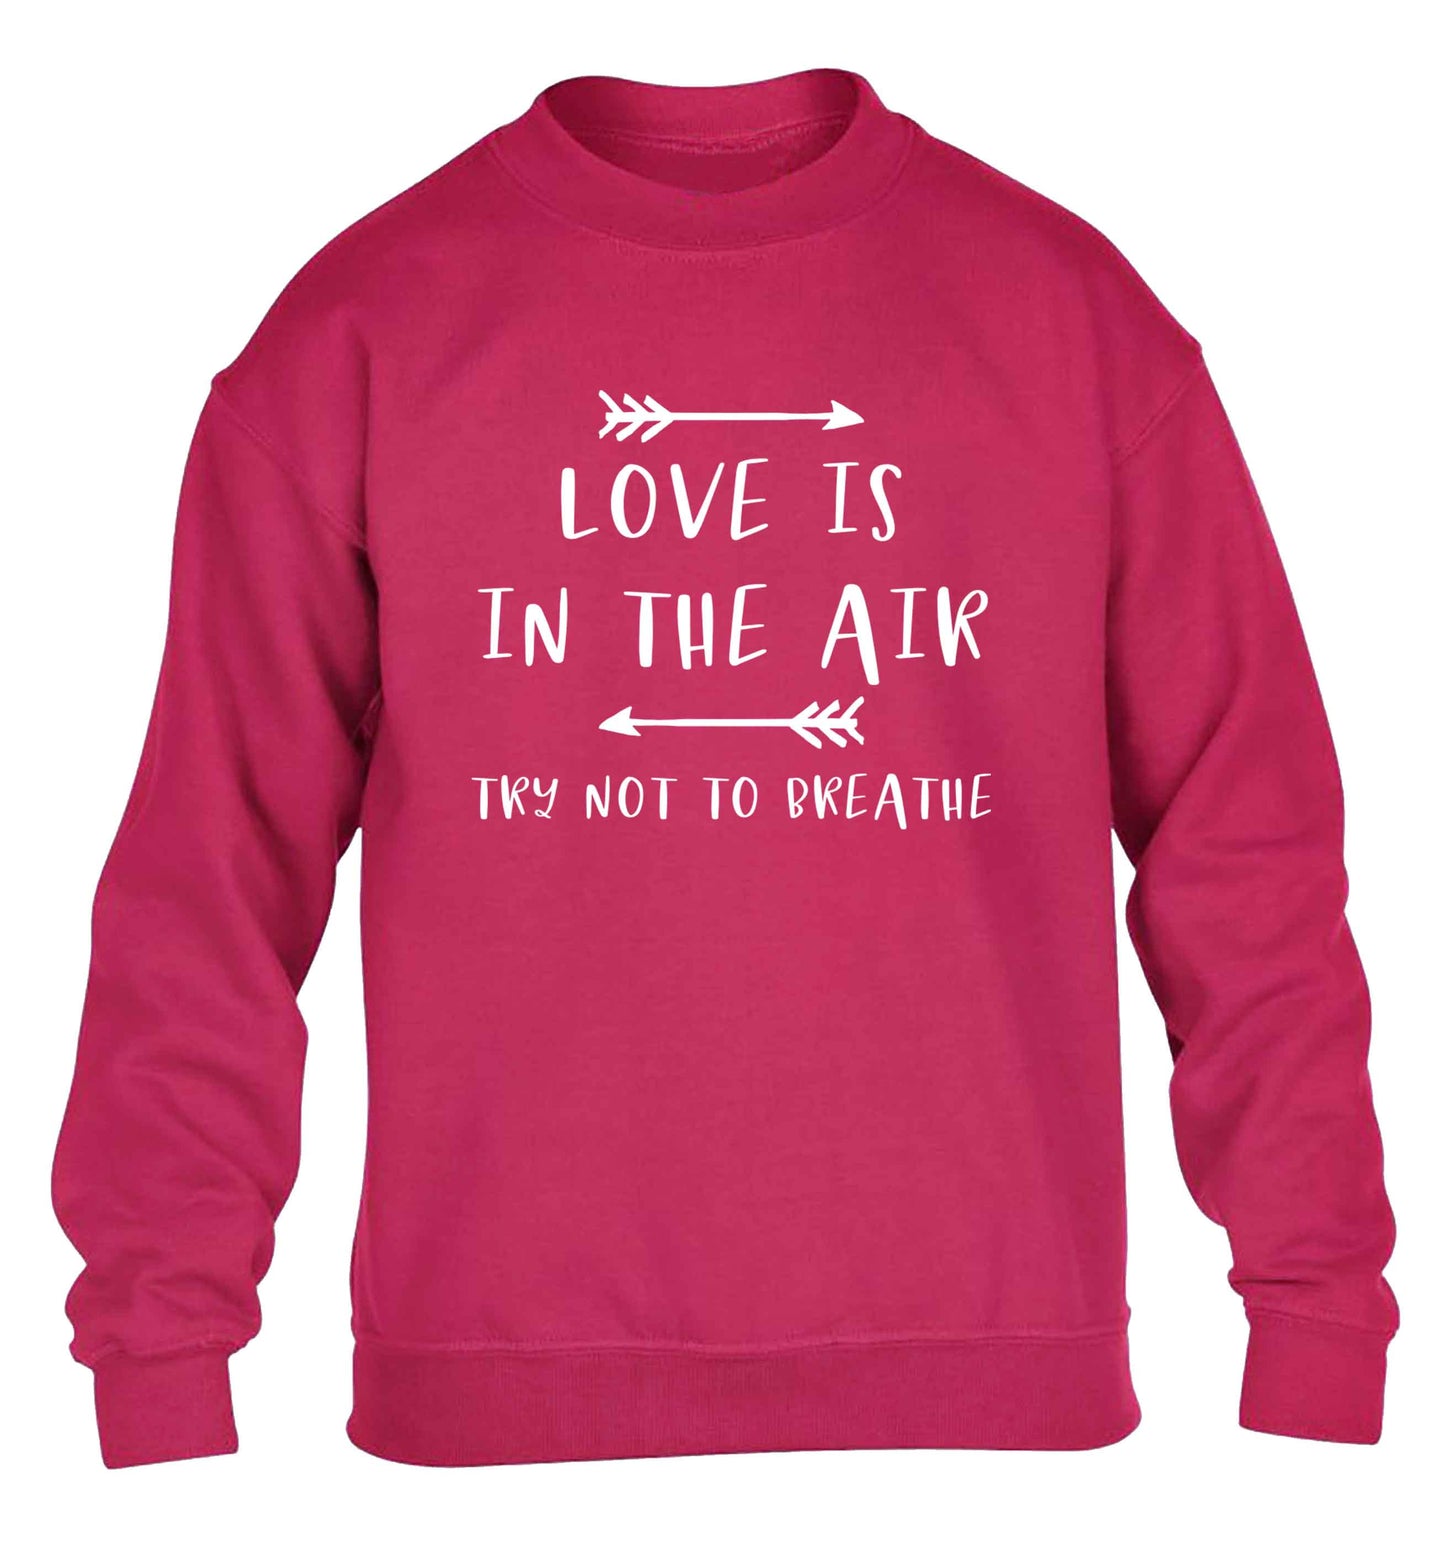 Love is in the air try not to breathe children's pink sweater 12-13 Years